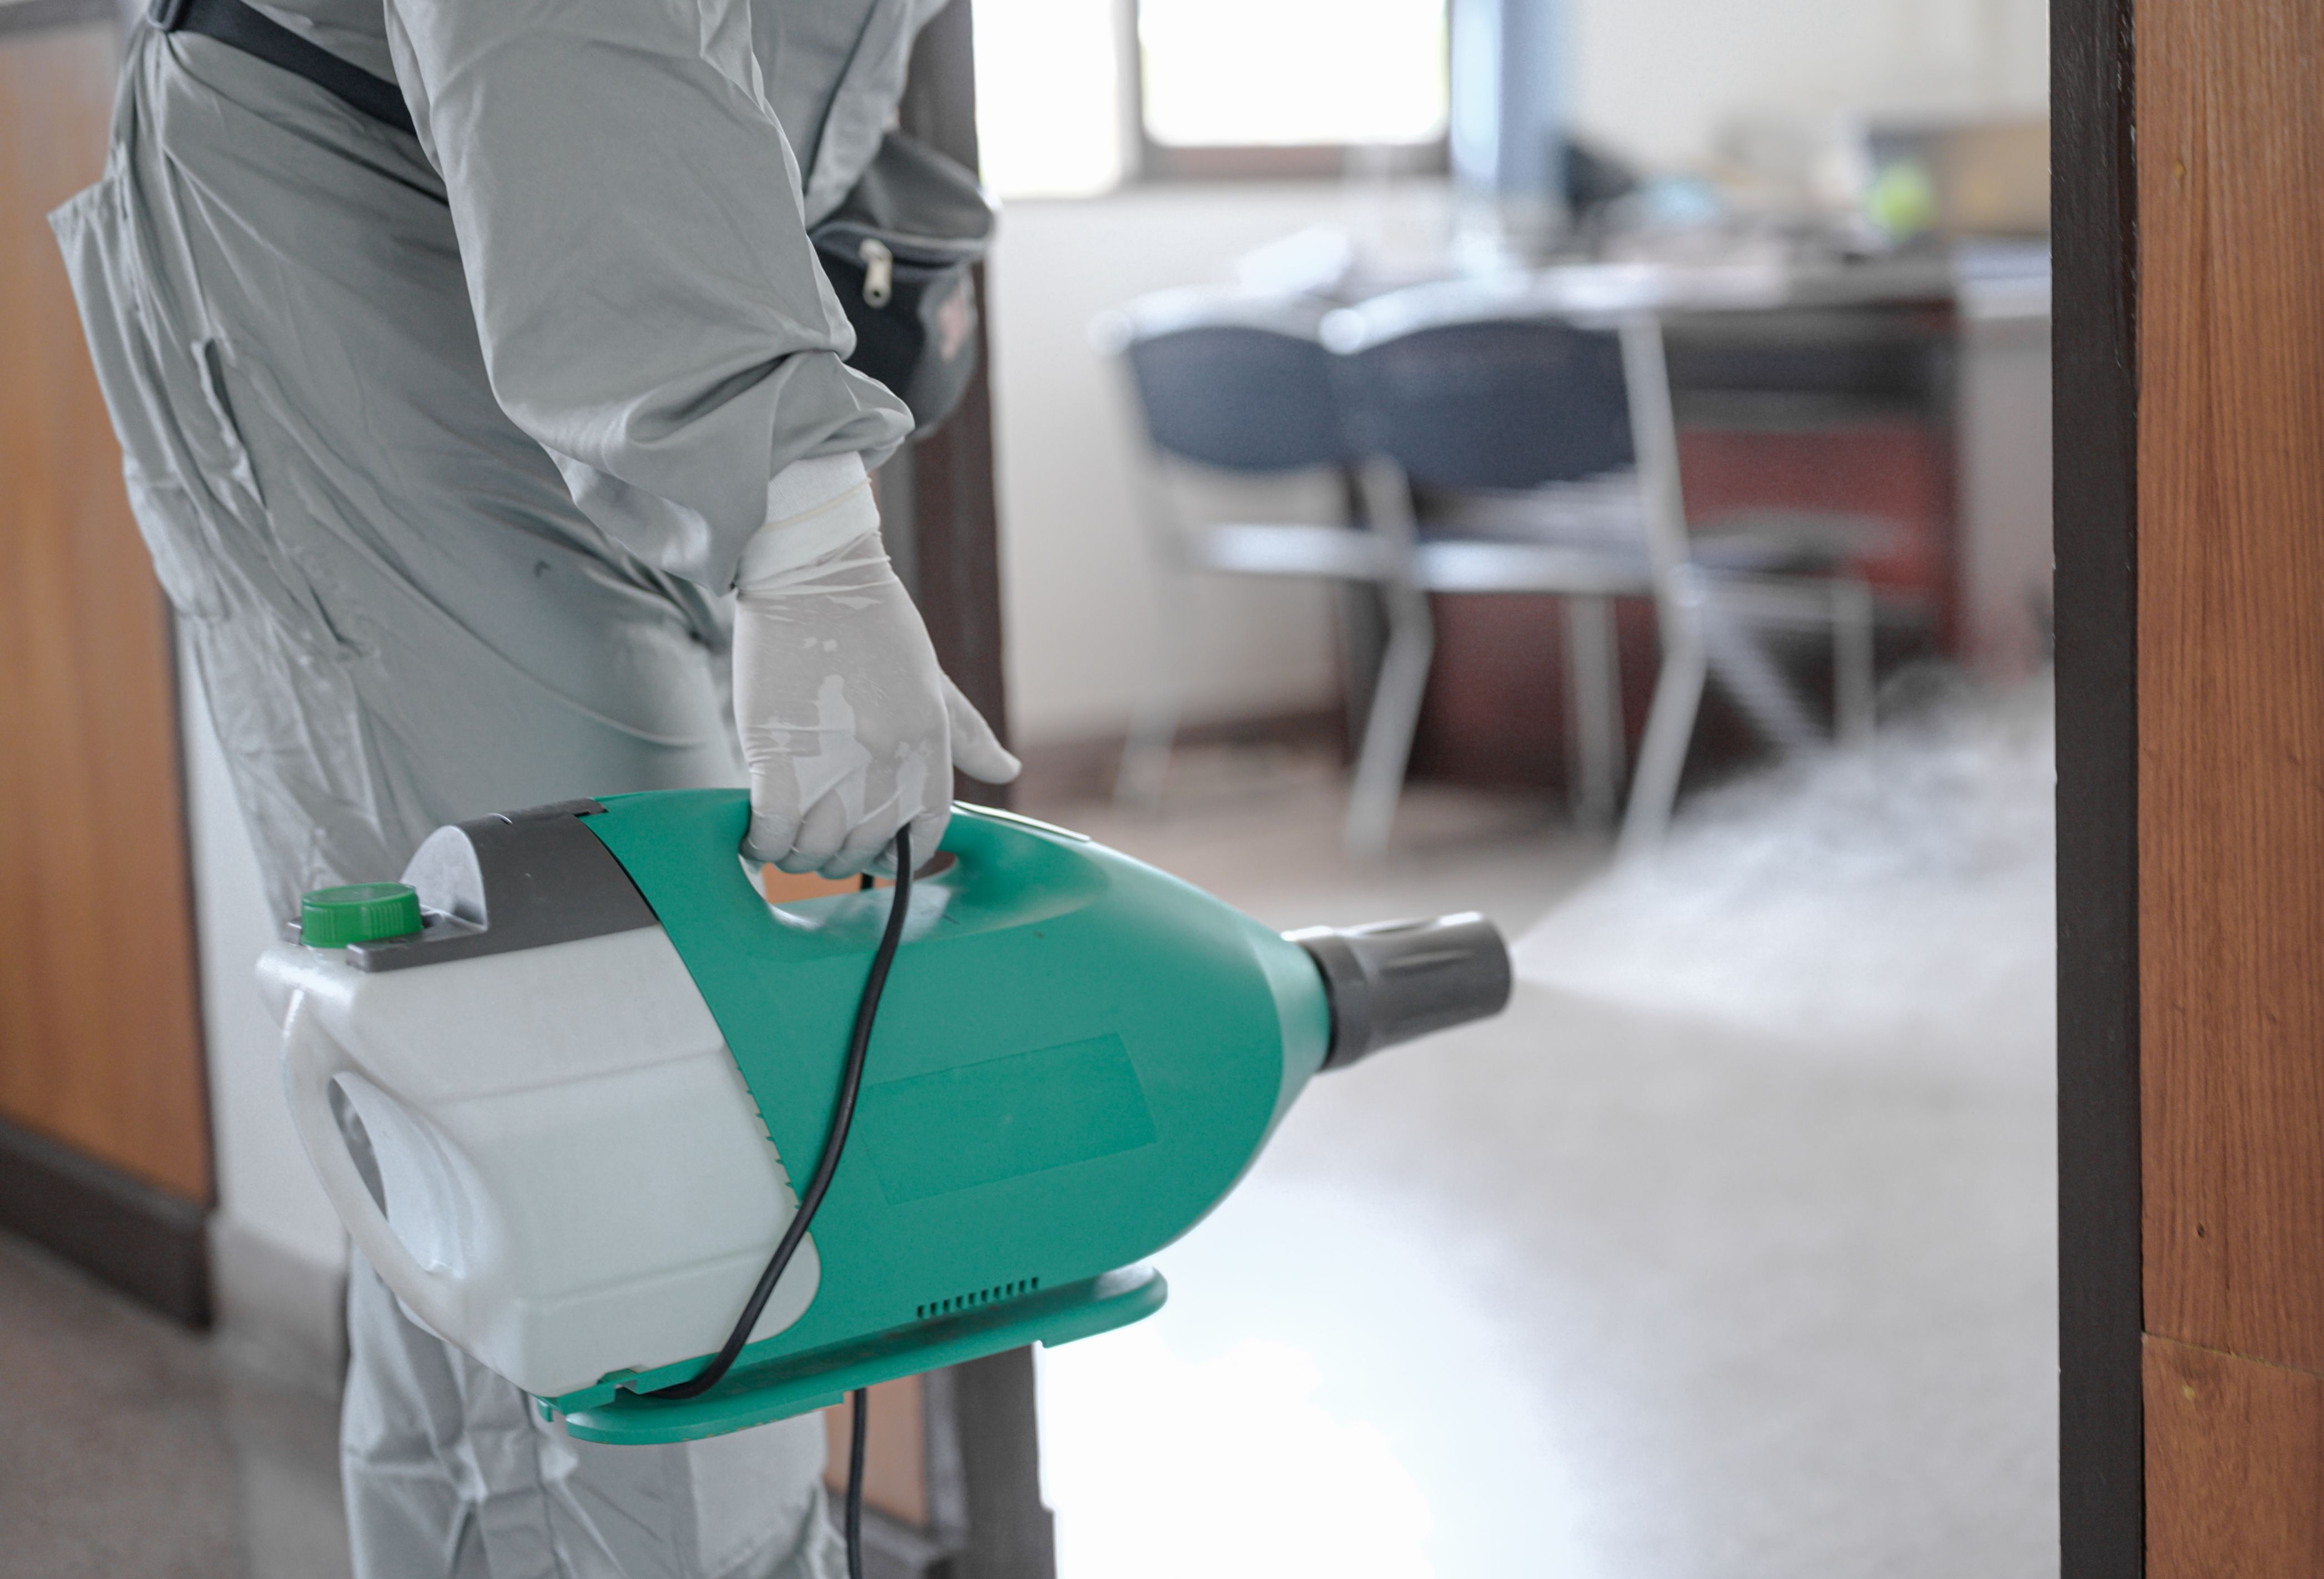 Find Deep clean Disinfecting Services